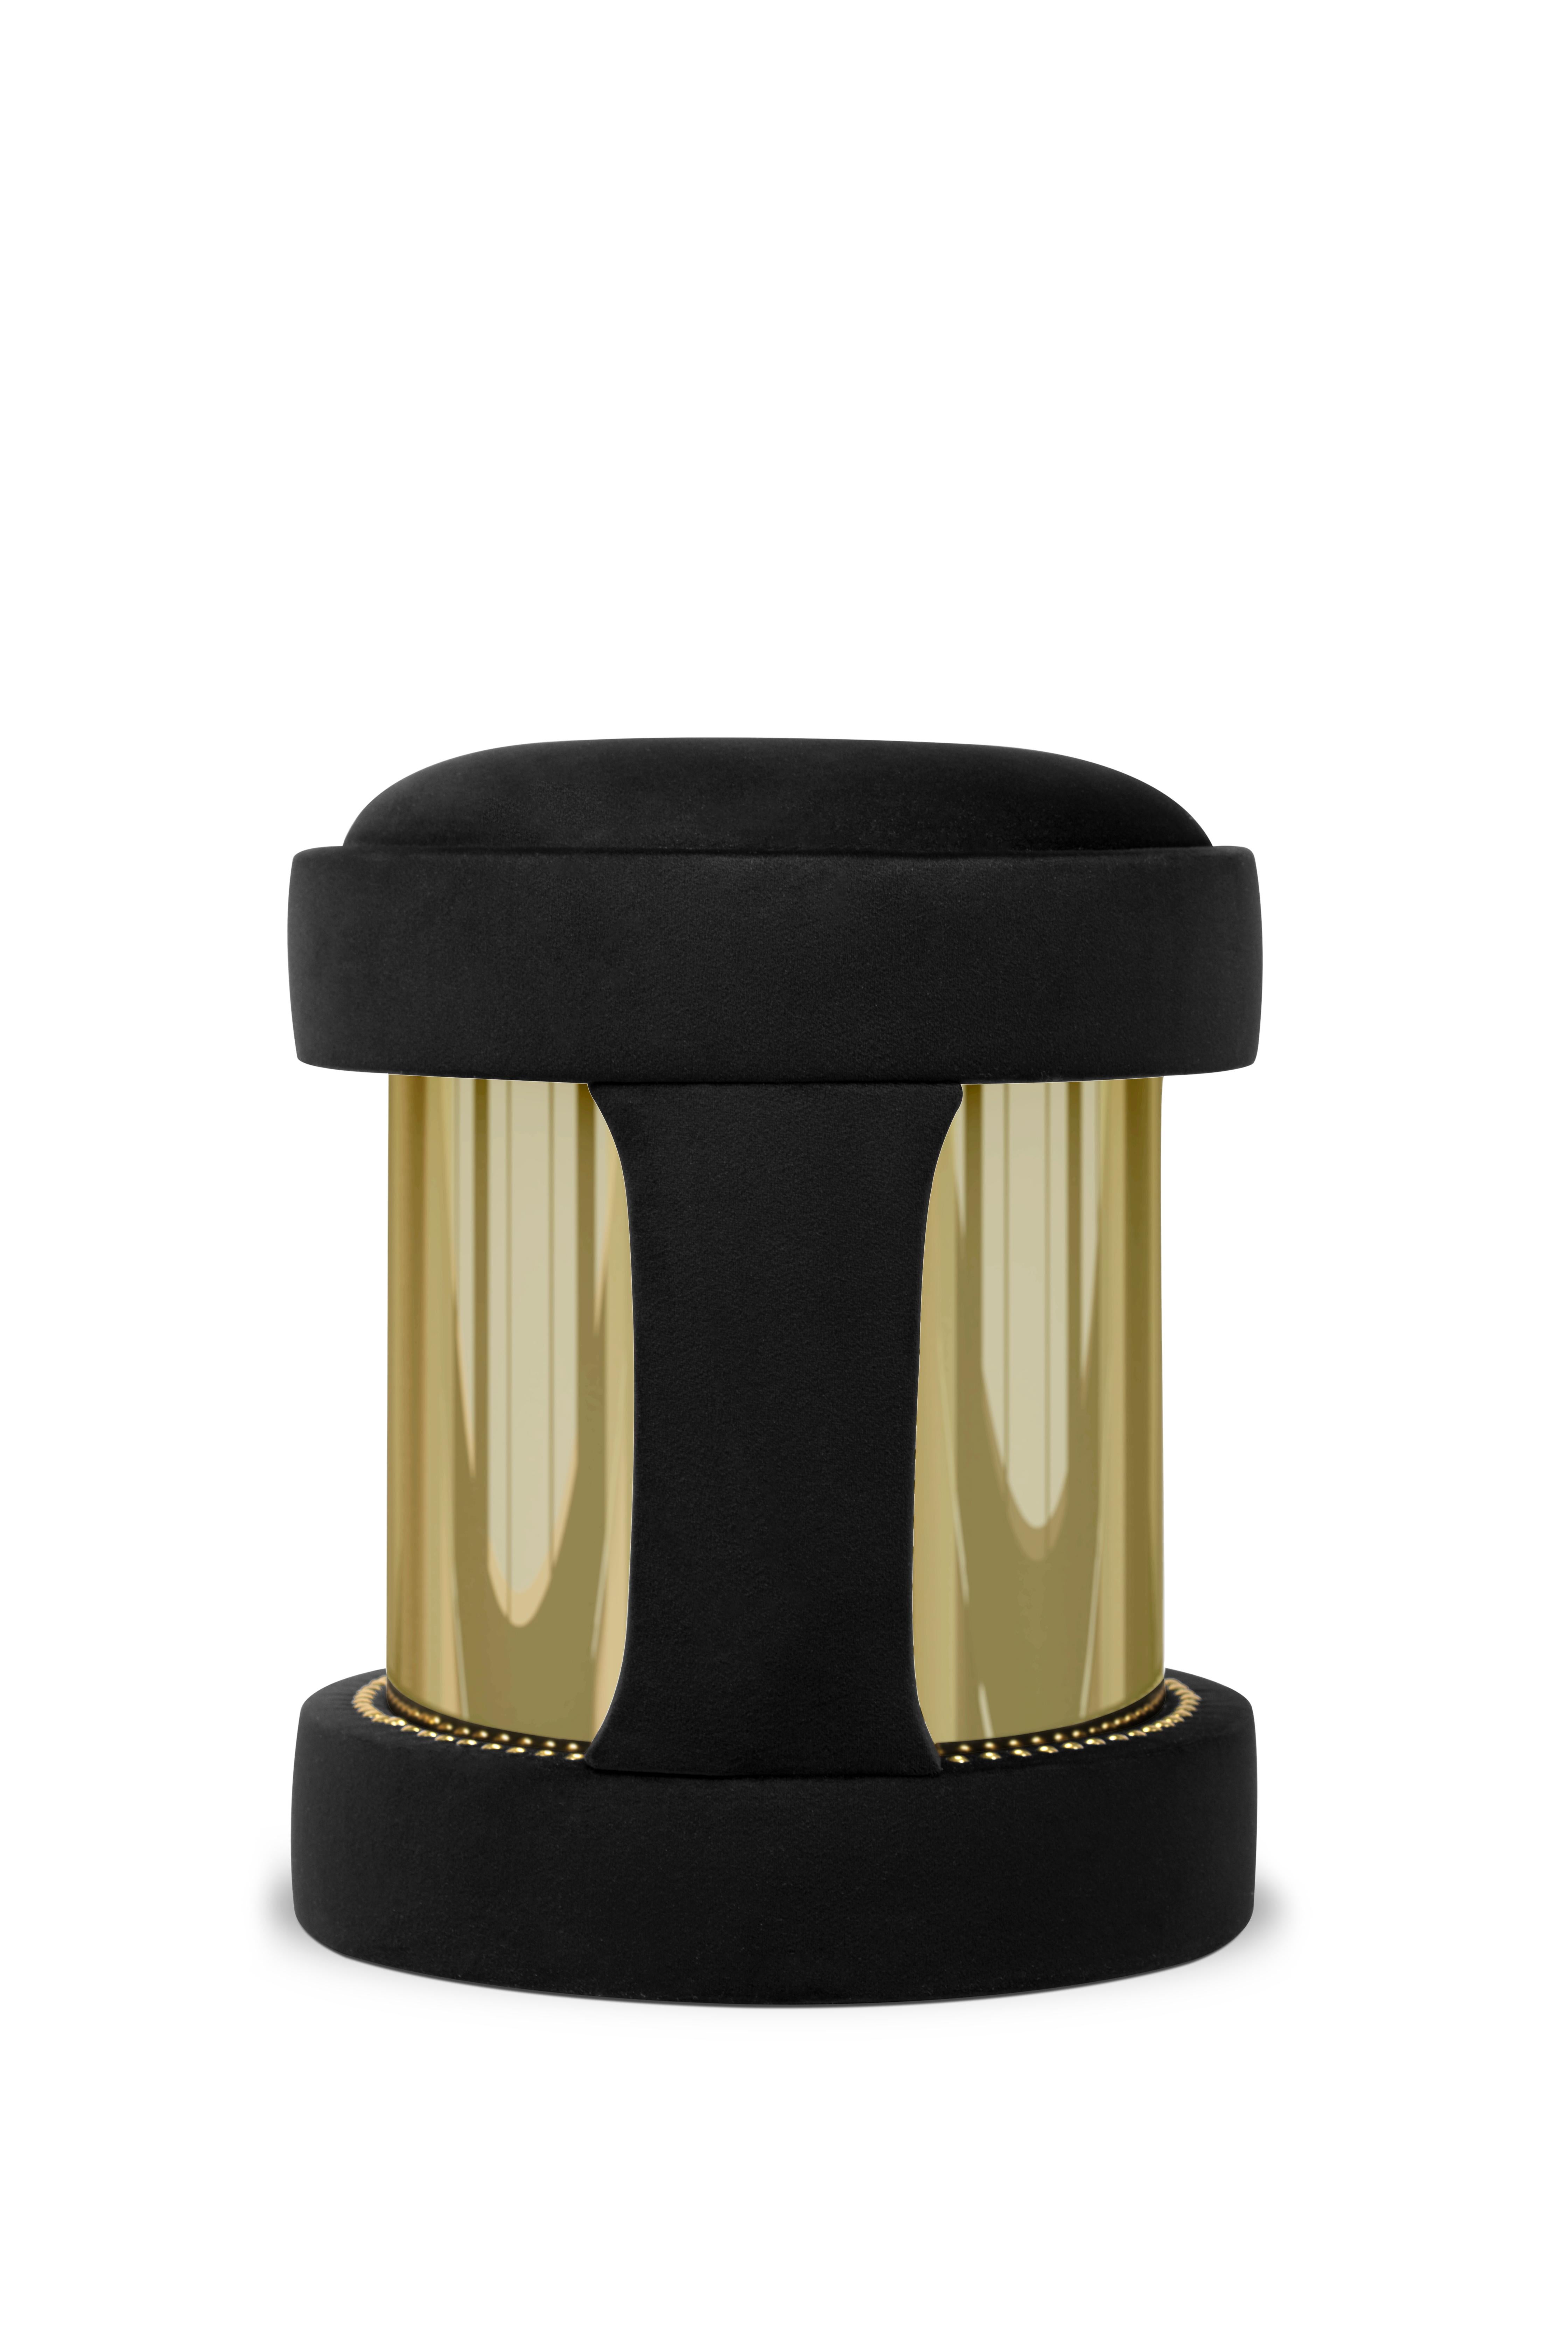 An upholstered delicacy emerging from the careful application of luscious black velvet touches and passionate design. Extra luxury feel is given by the gold plated brass finish to this marvelous stool, which will embellish the most sumptuous